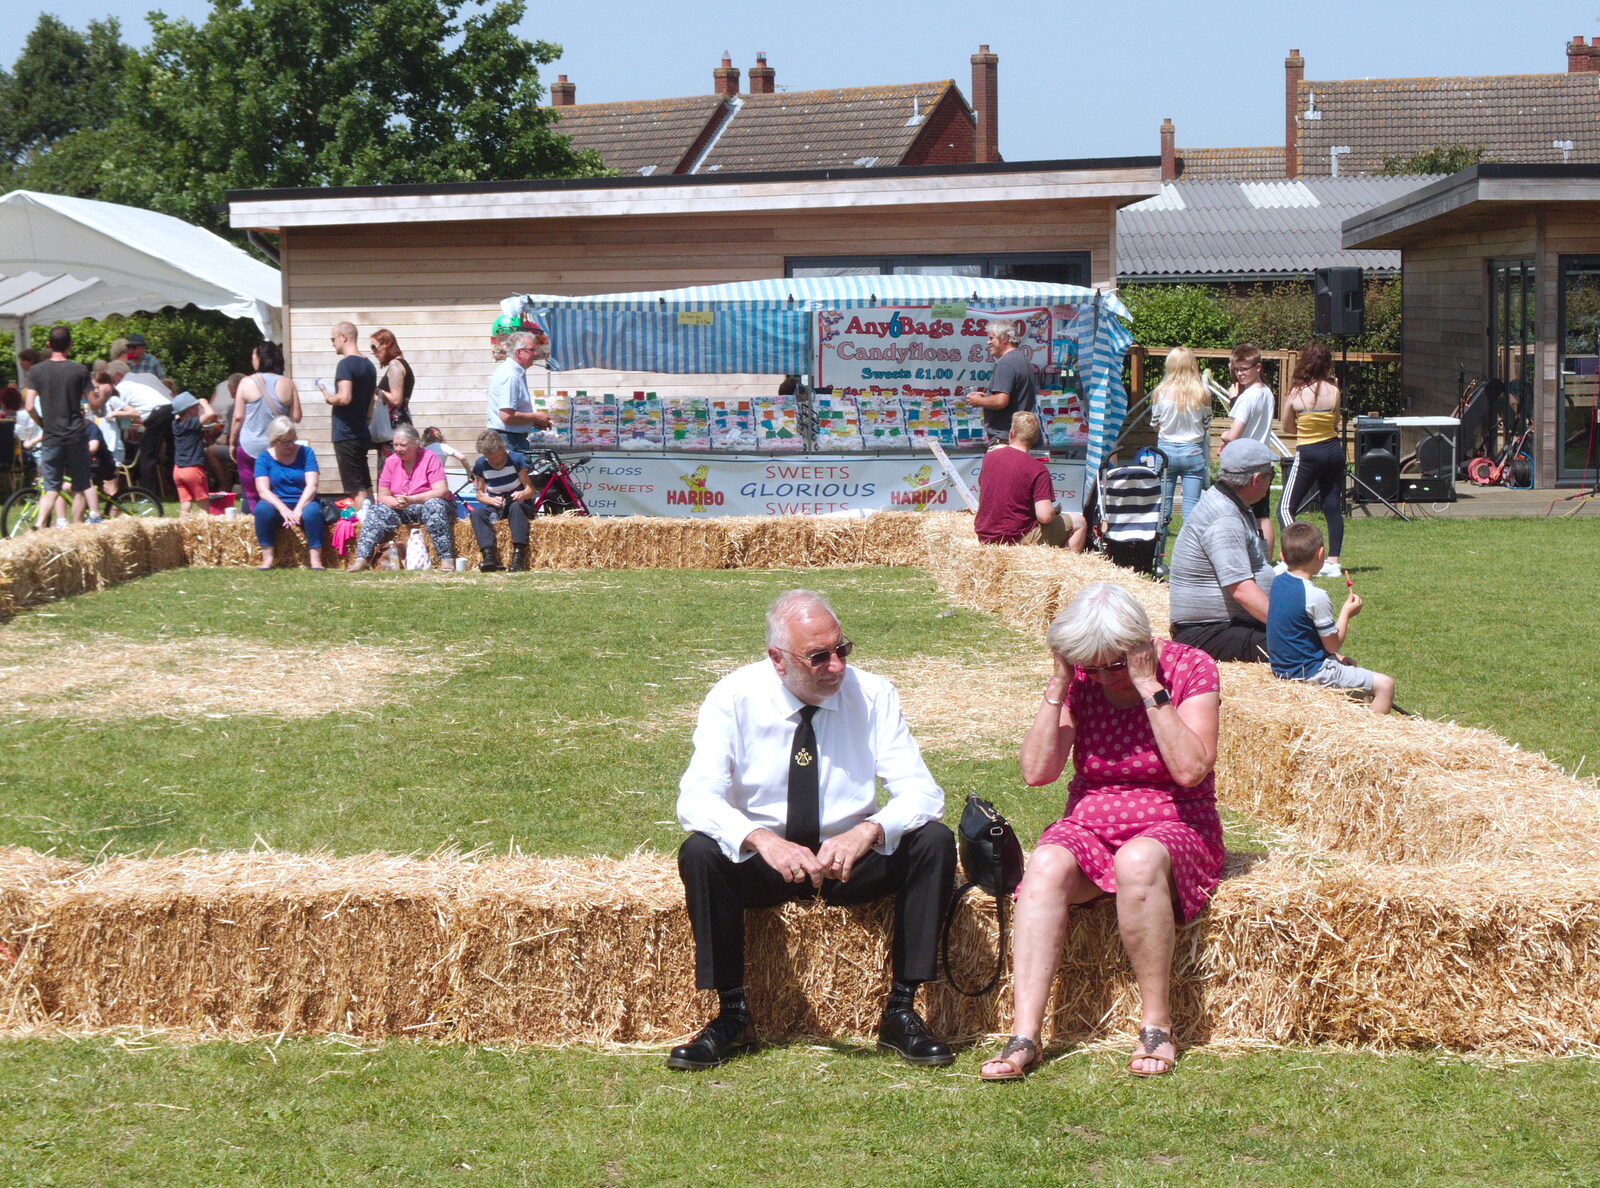 Sitting on bales from GSB and the Gislingham Fete, Suffolk - 29th June 2019